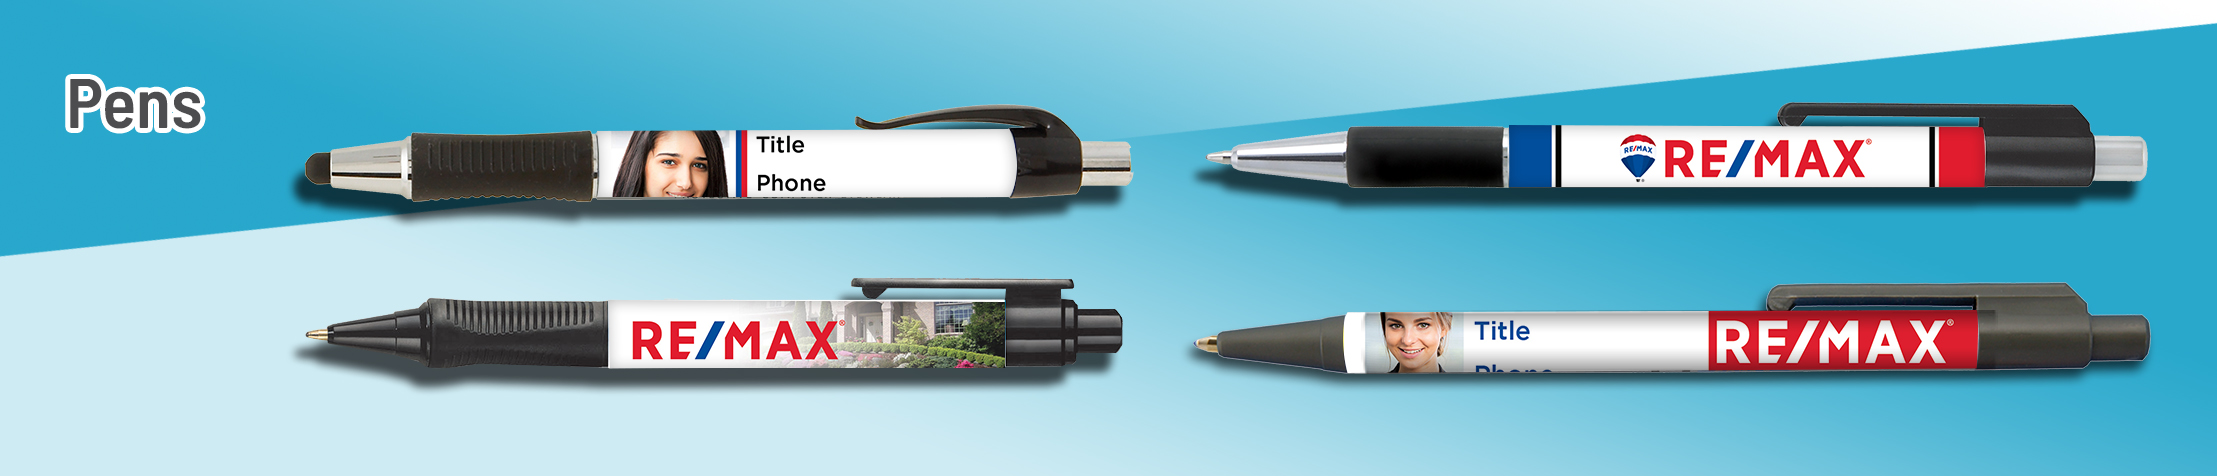 RE/MAX Real Estate Pens - RE/MAX  personalized realtor promotional products | Sparkprint.com